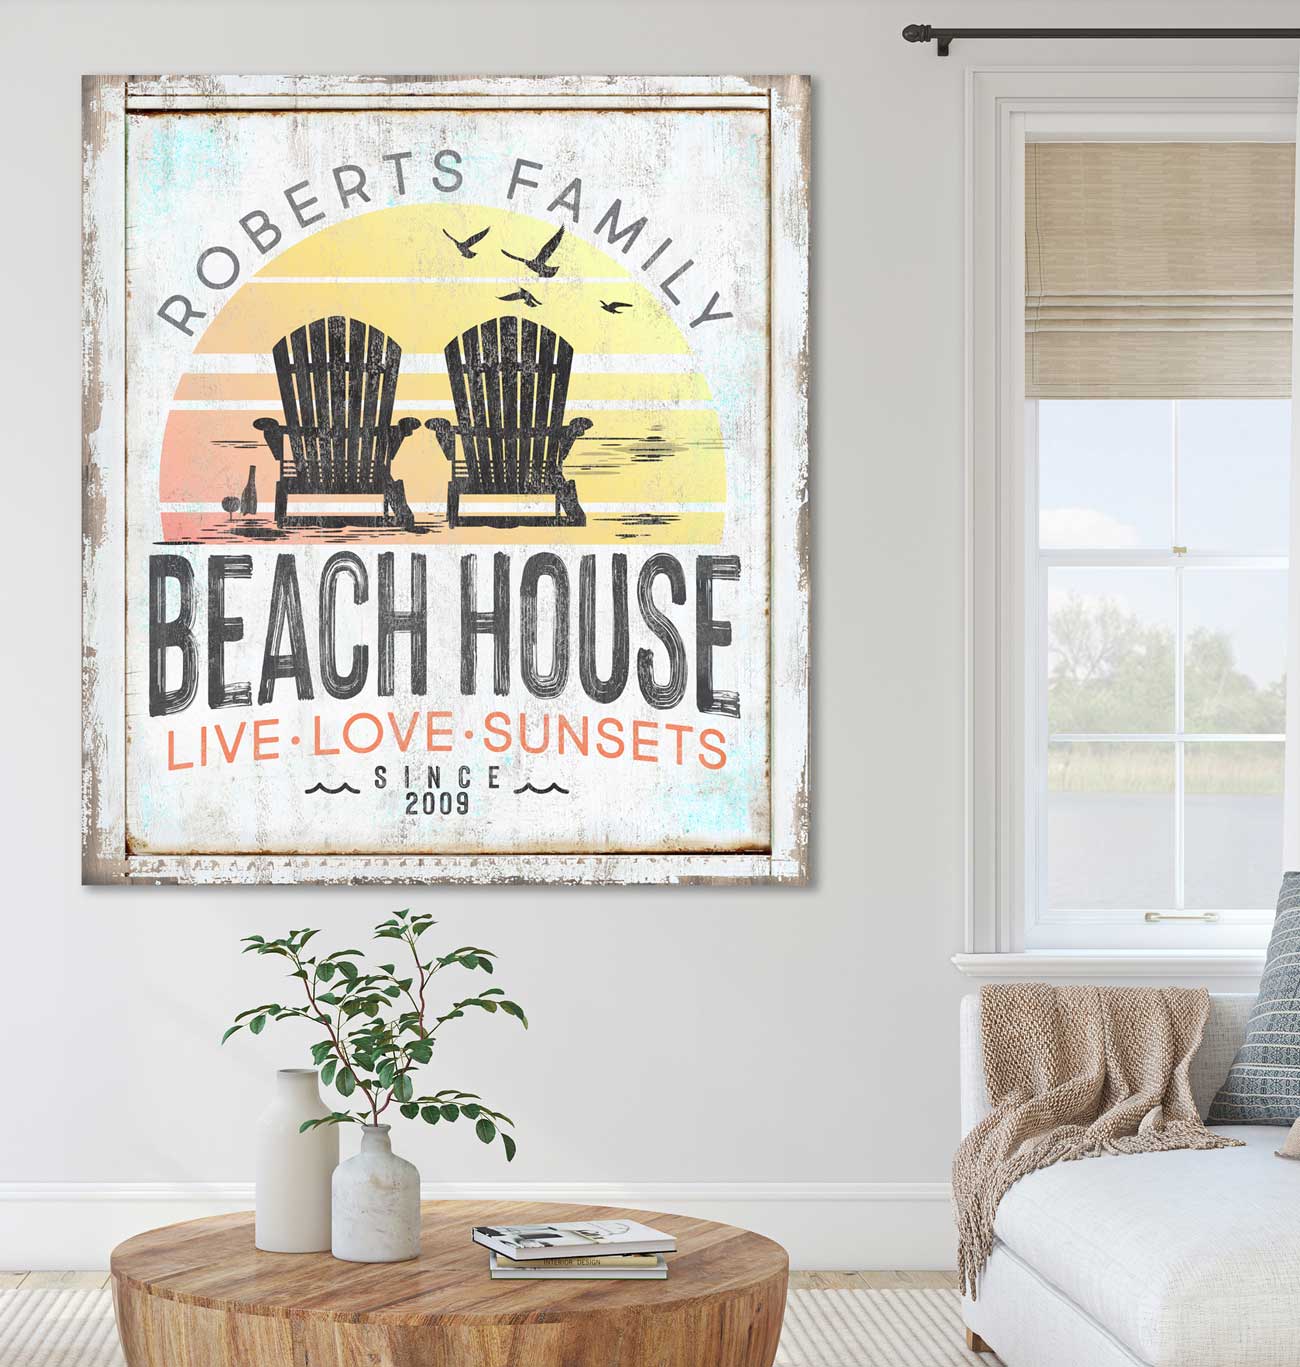 coastal Decor Sign of a sunset with chairs and birds flying in the sunset with family name and est. date.